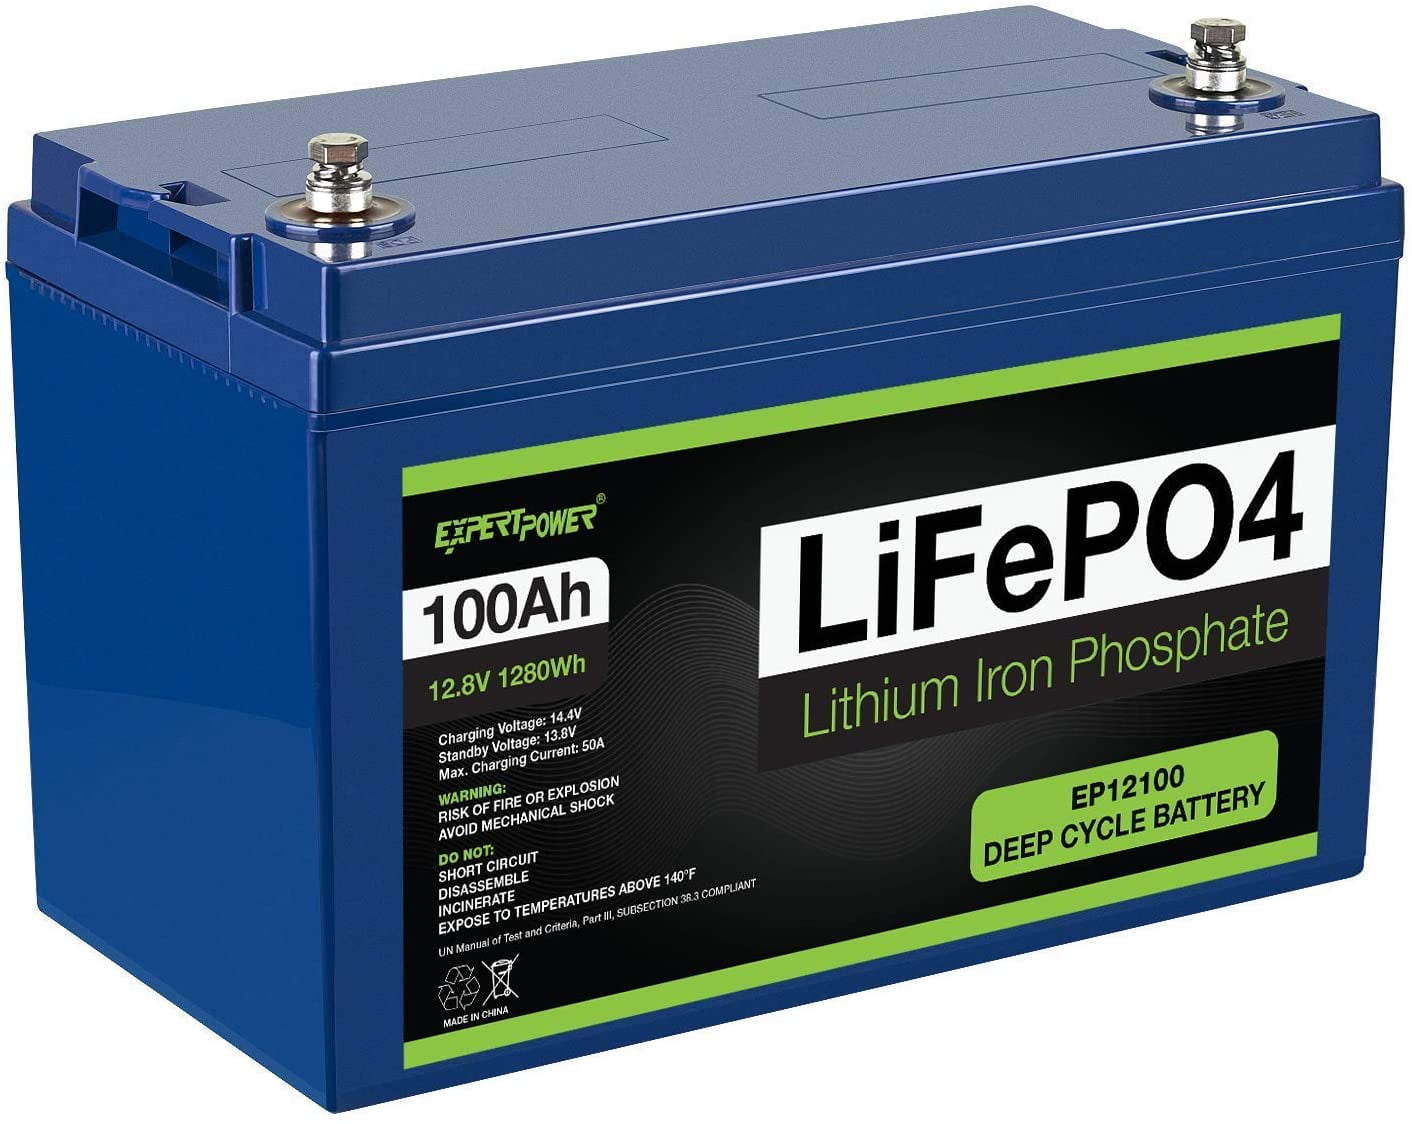 What You Need to Know Before Using a Deep Cycle Battery